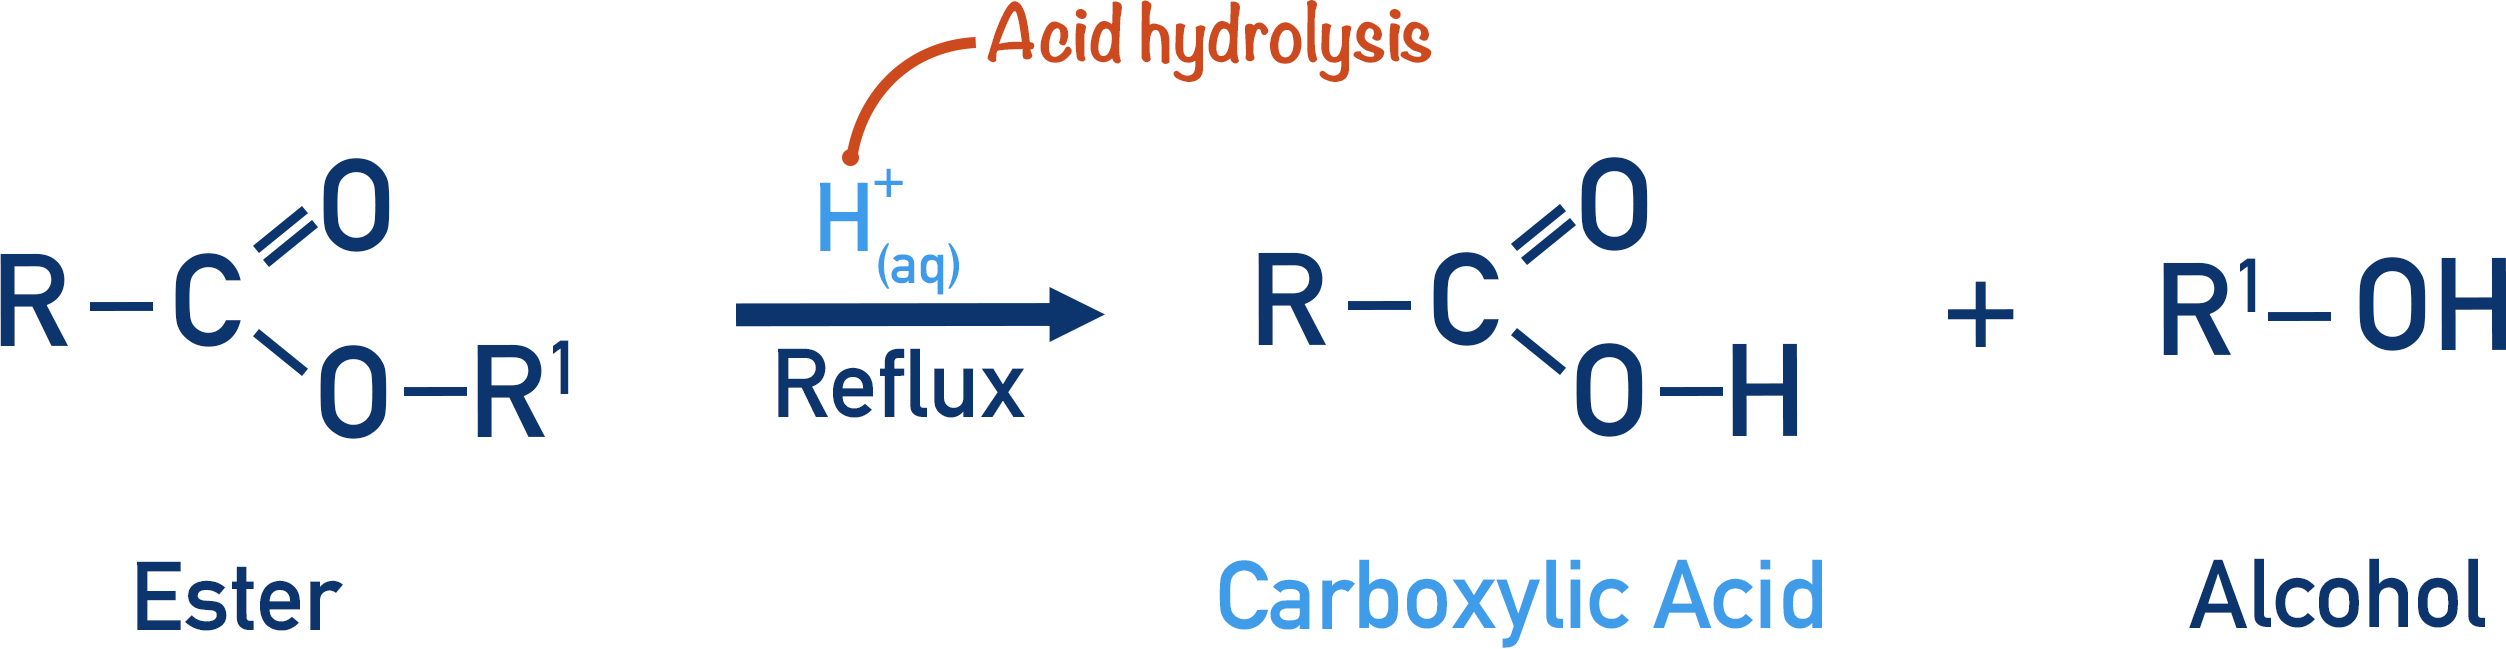 acid hydrolysis of ester reflux to form carboxylic acid